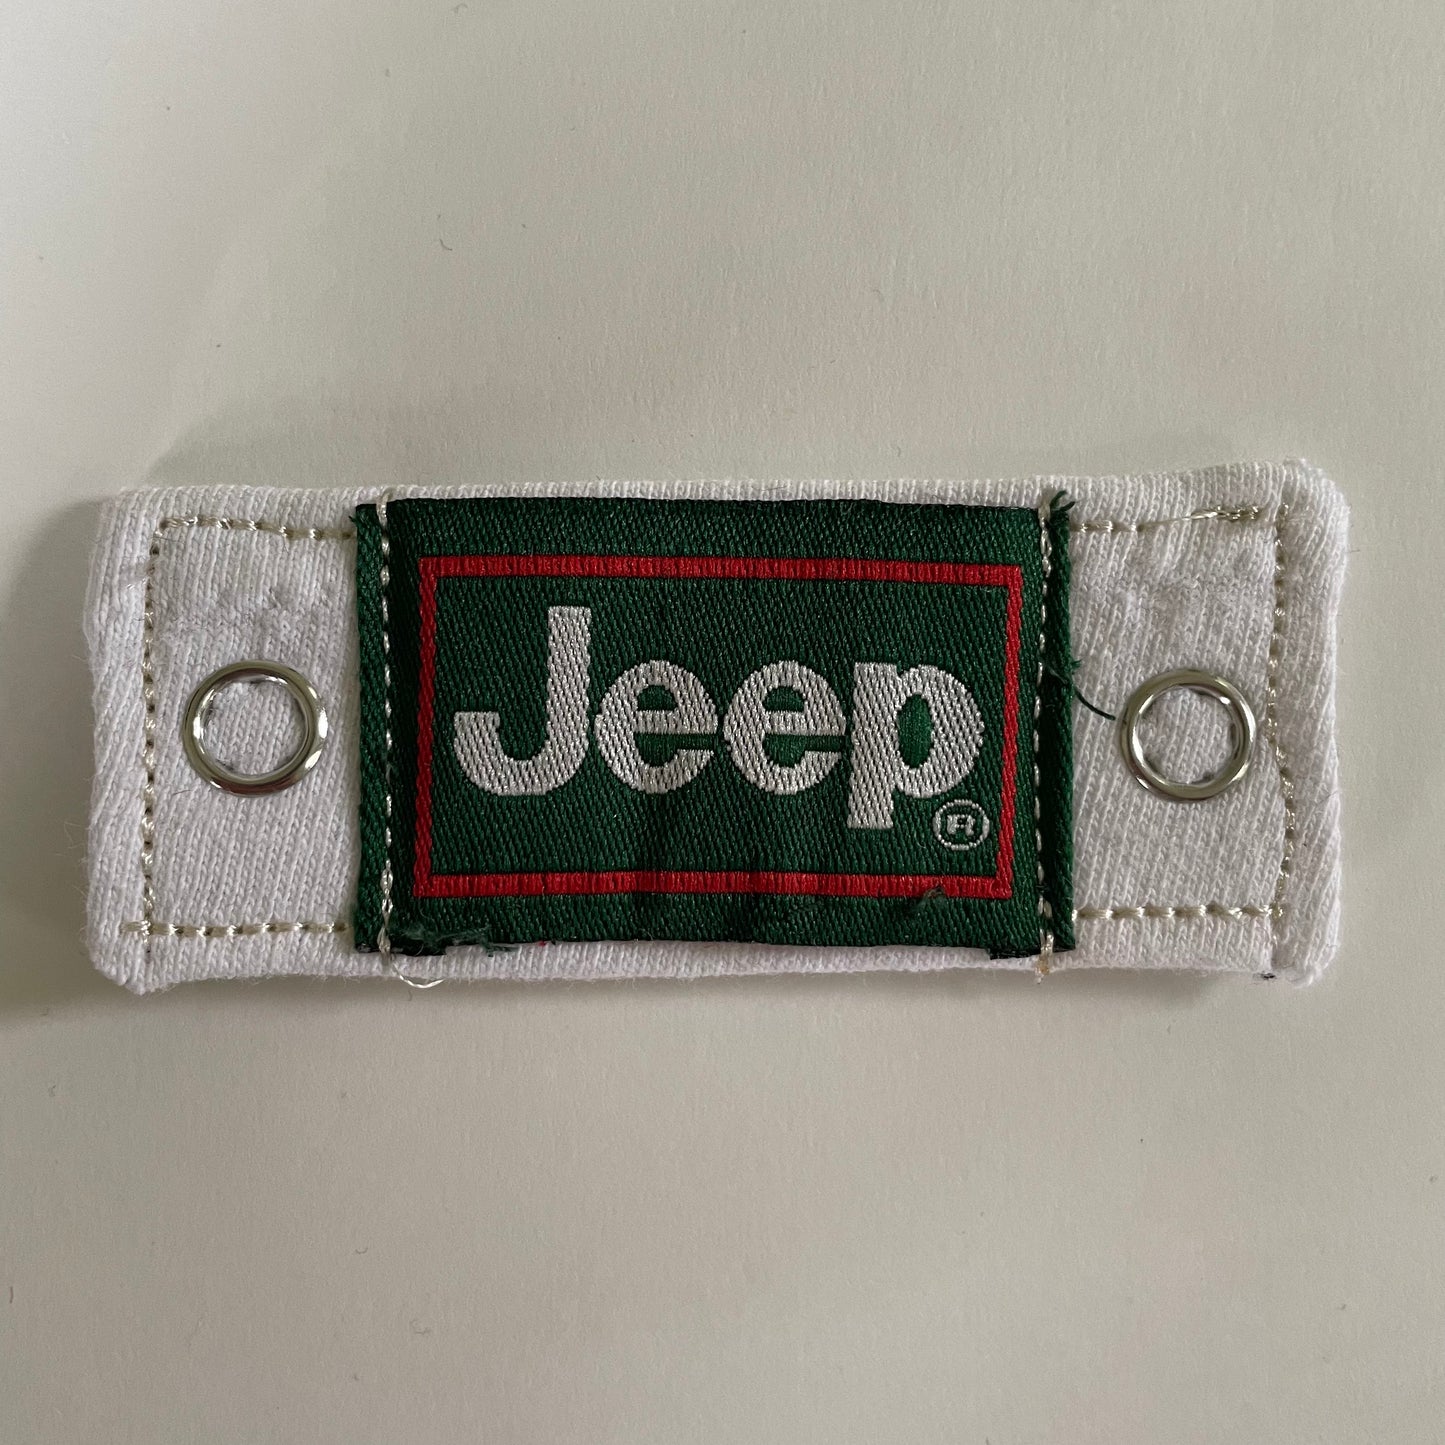 Tag Patch | 90's Jeep